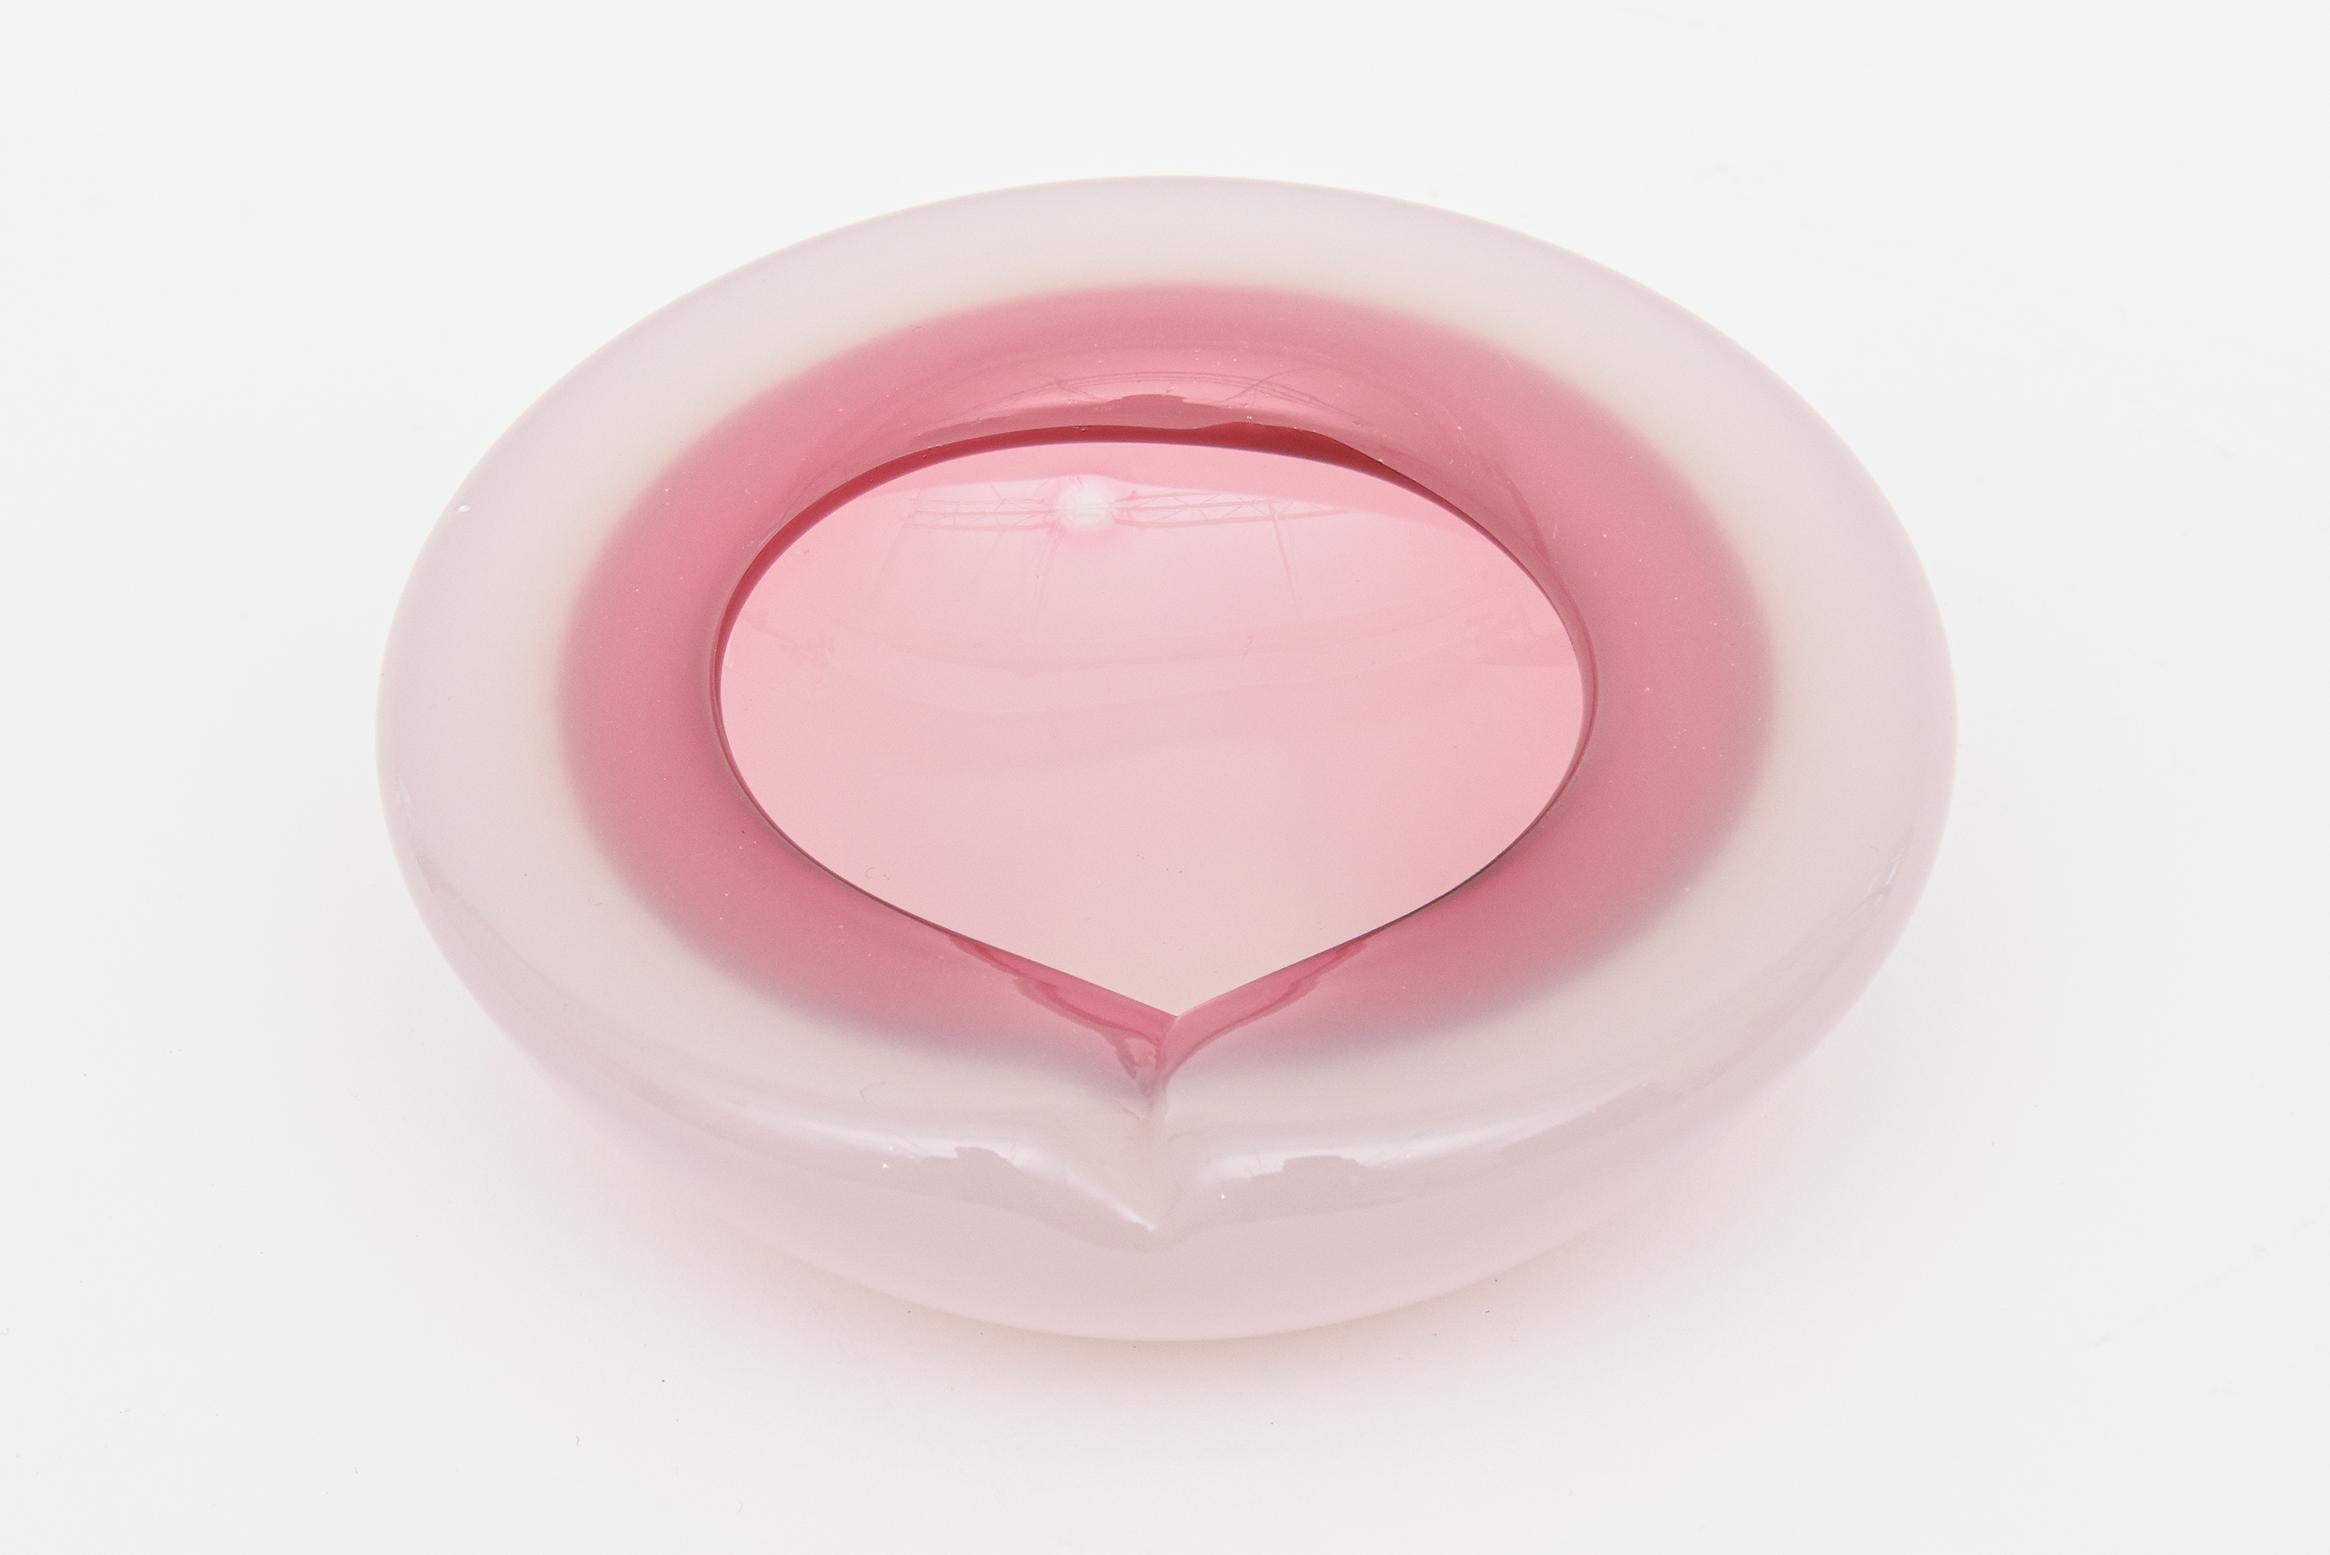 This beautiful Italian Murano vintage glass sommerso geode bowl is attributed to the work of Archimede Seguso. It has layers of different shades of pink going lighter to darker as exemplified in the professional photos. The interior pink line is